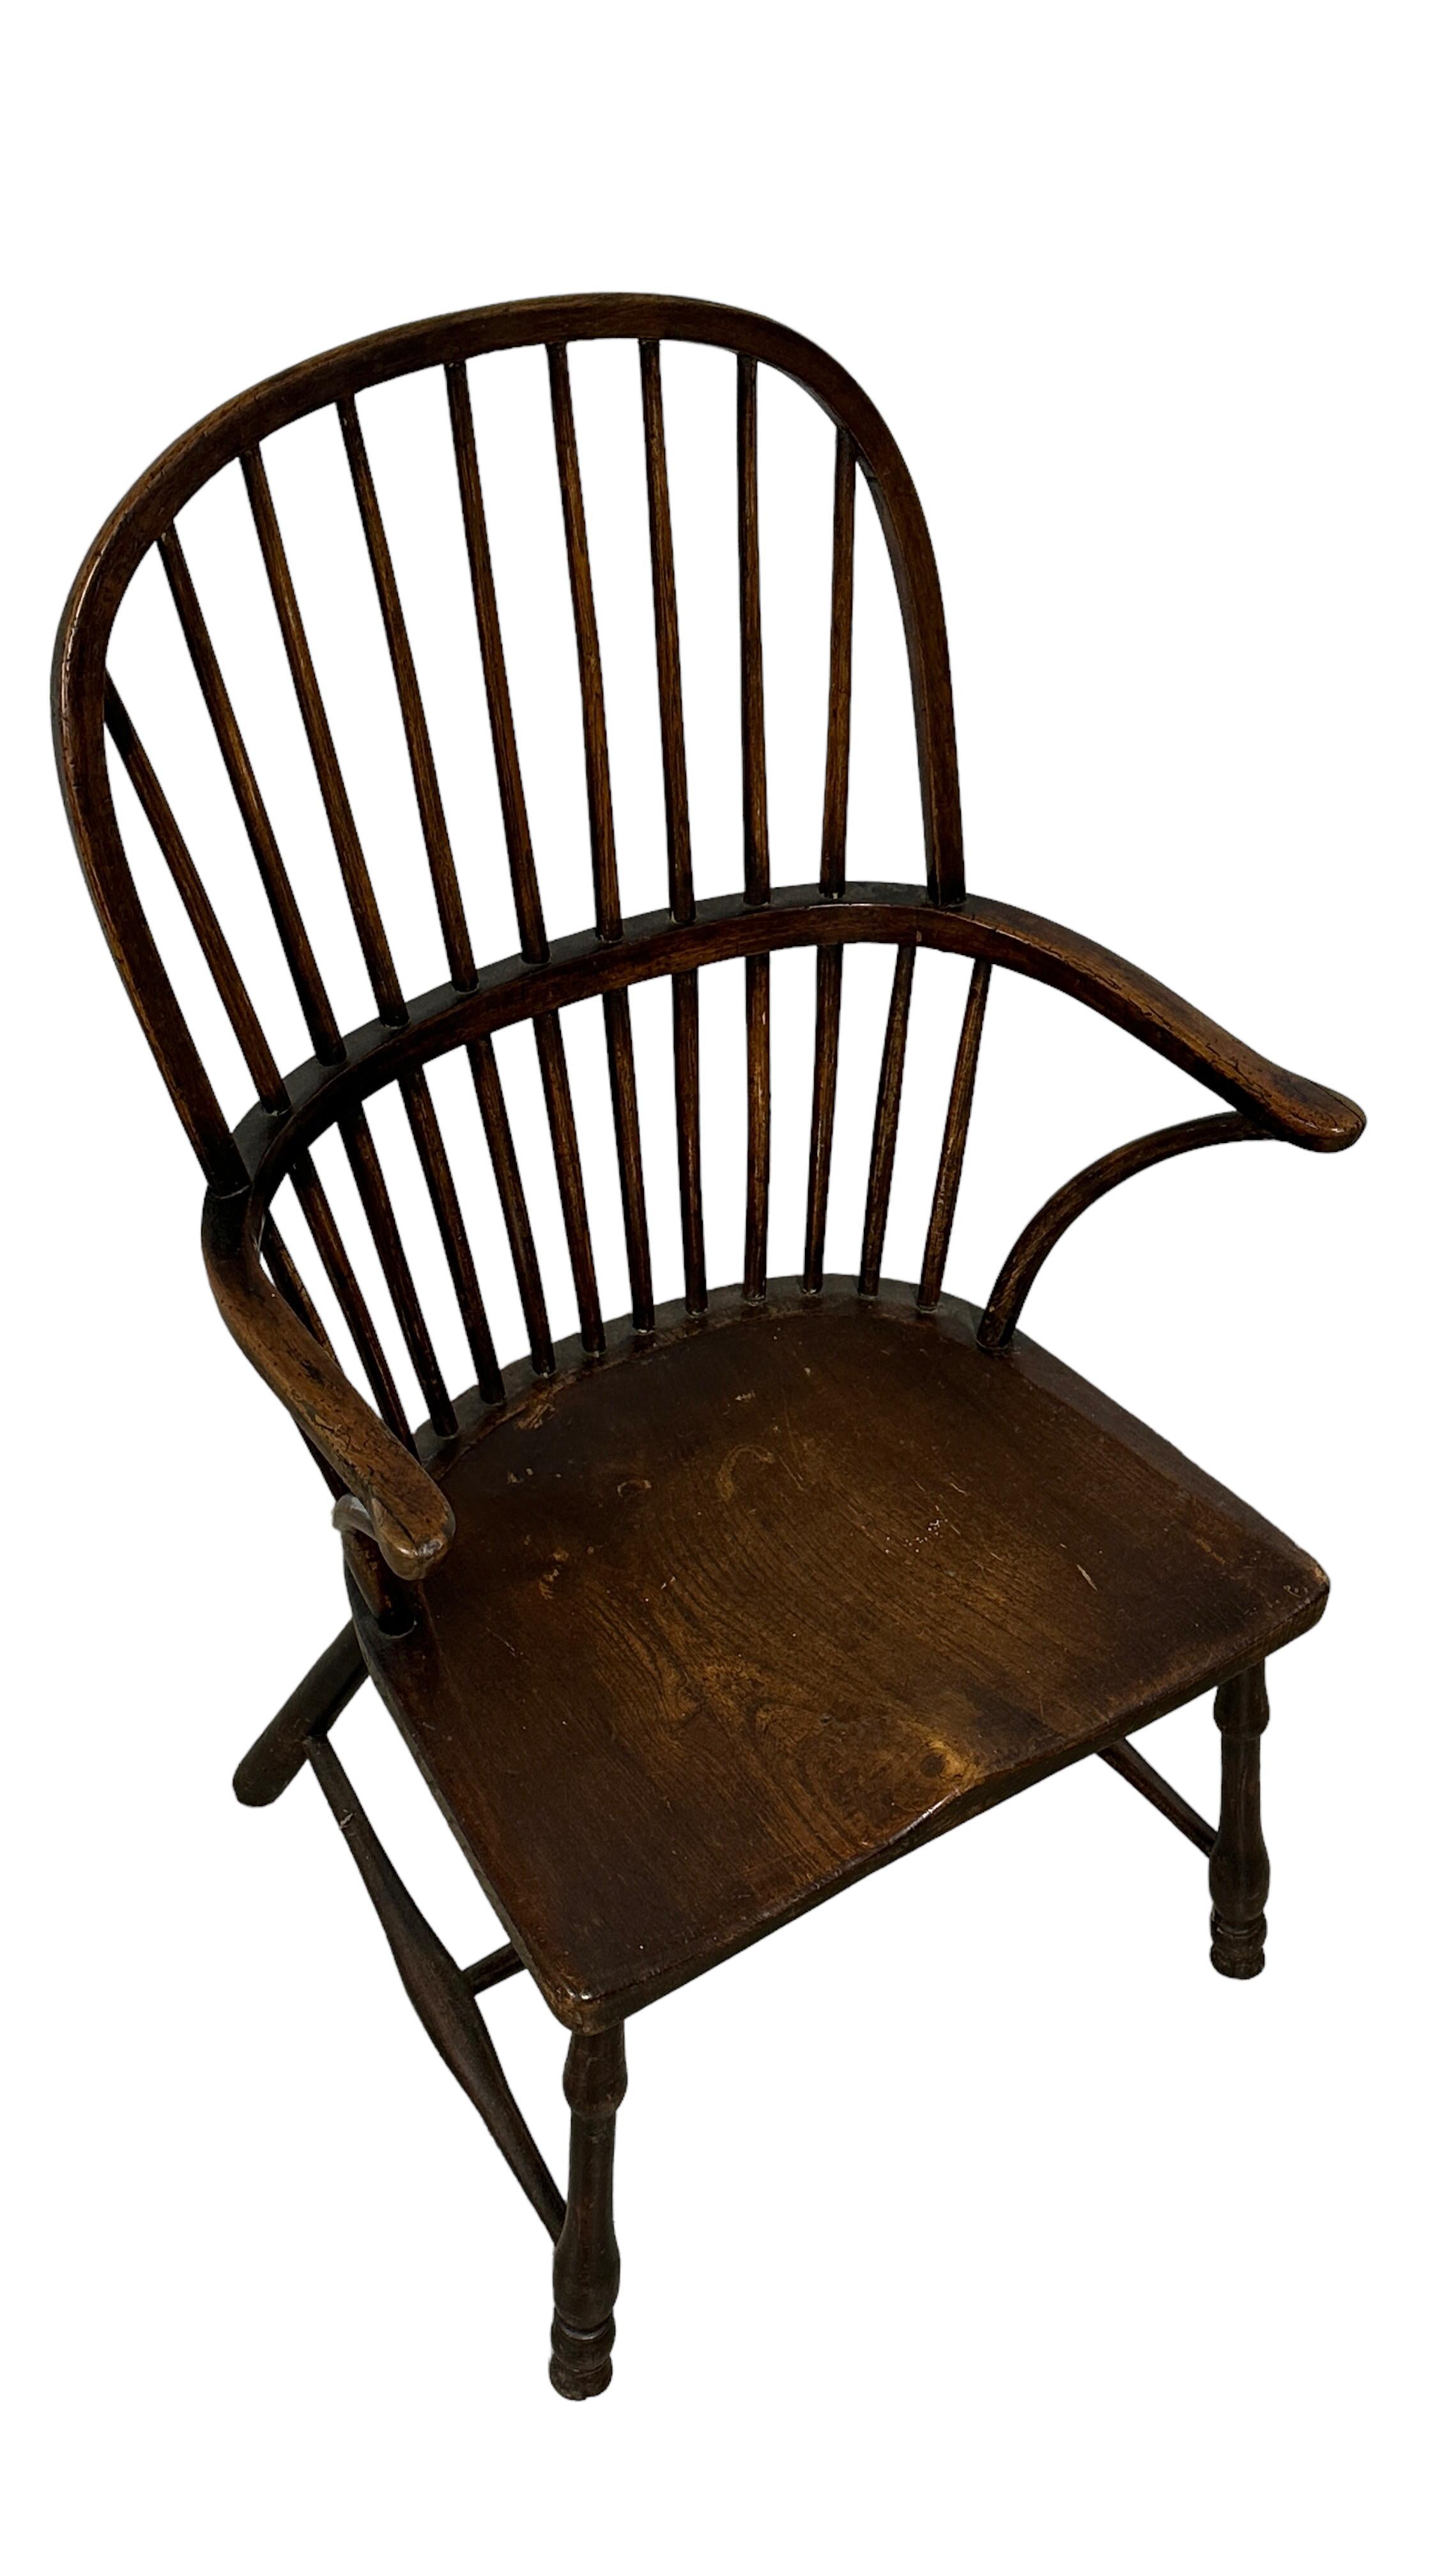 Beautiful Antique Windsor Wooden Chair, 19th Century, England 10